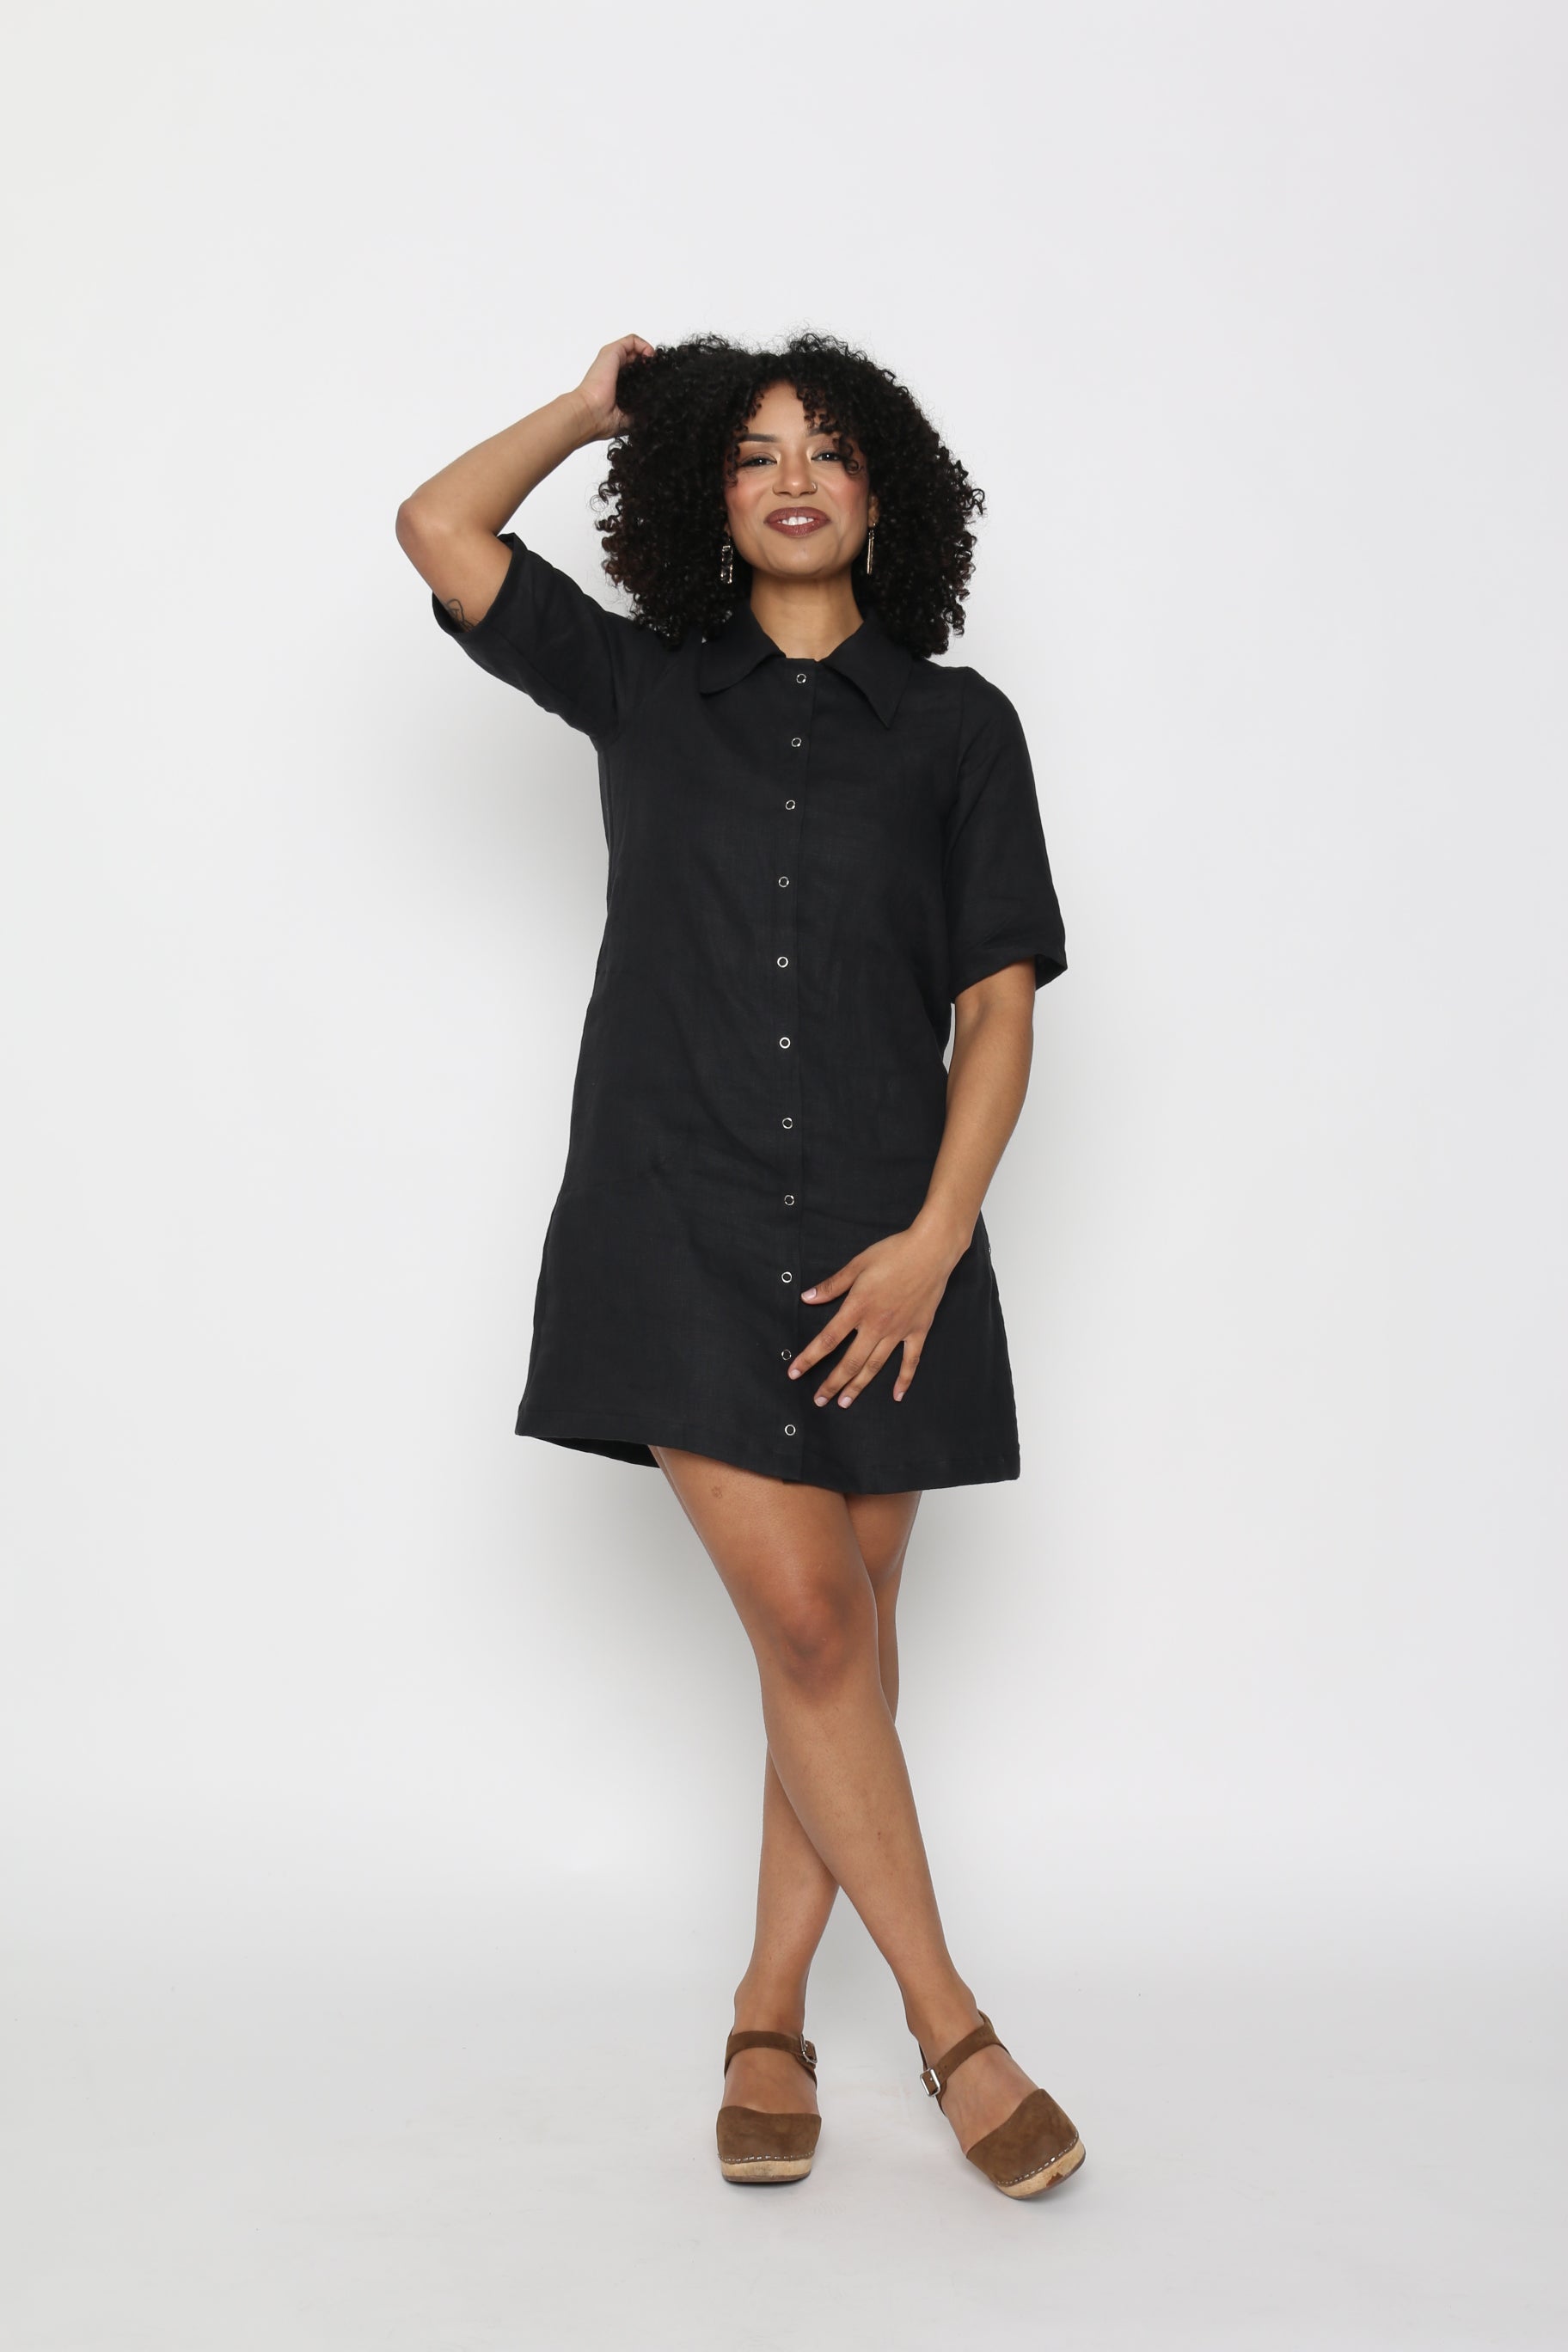 Revolution Dress in Black – Conscious Clothing